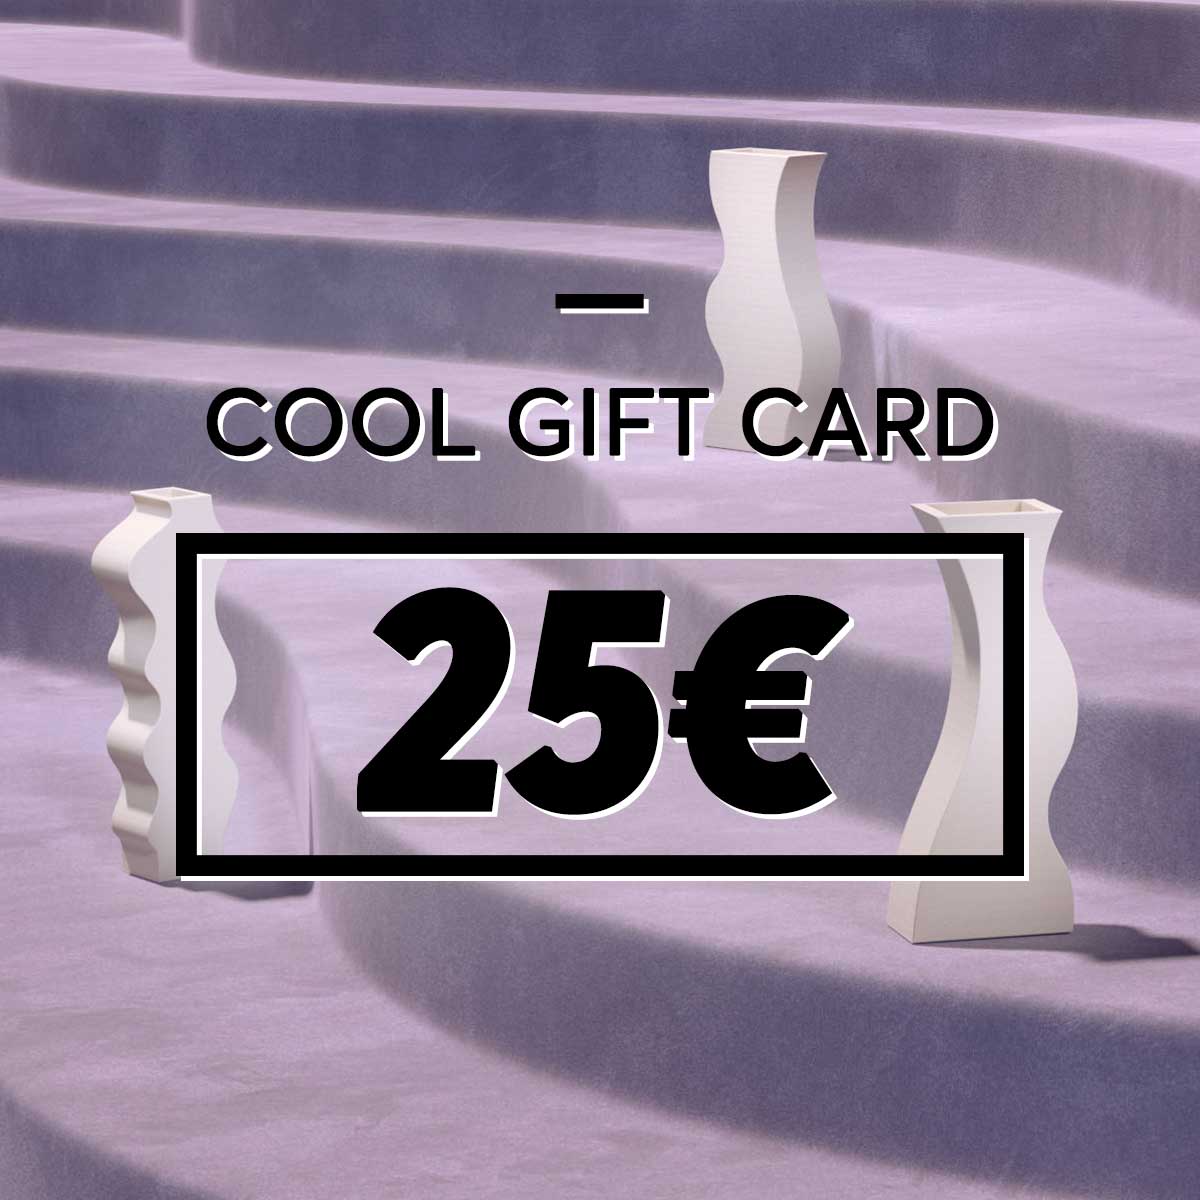 Cool Gift Card 25 Euros To Offer Cool Machine Store